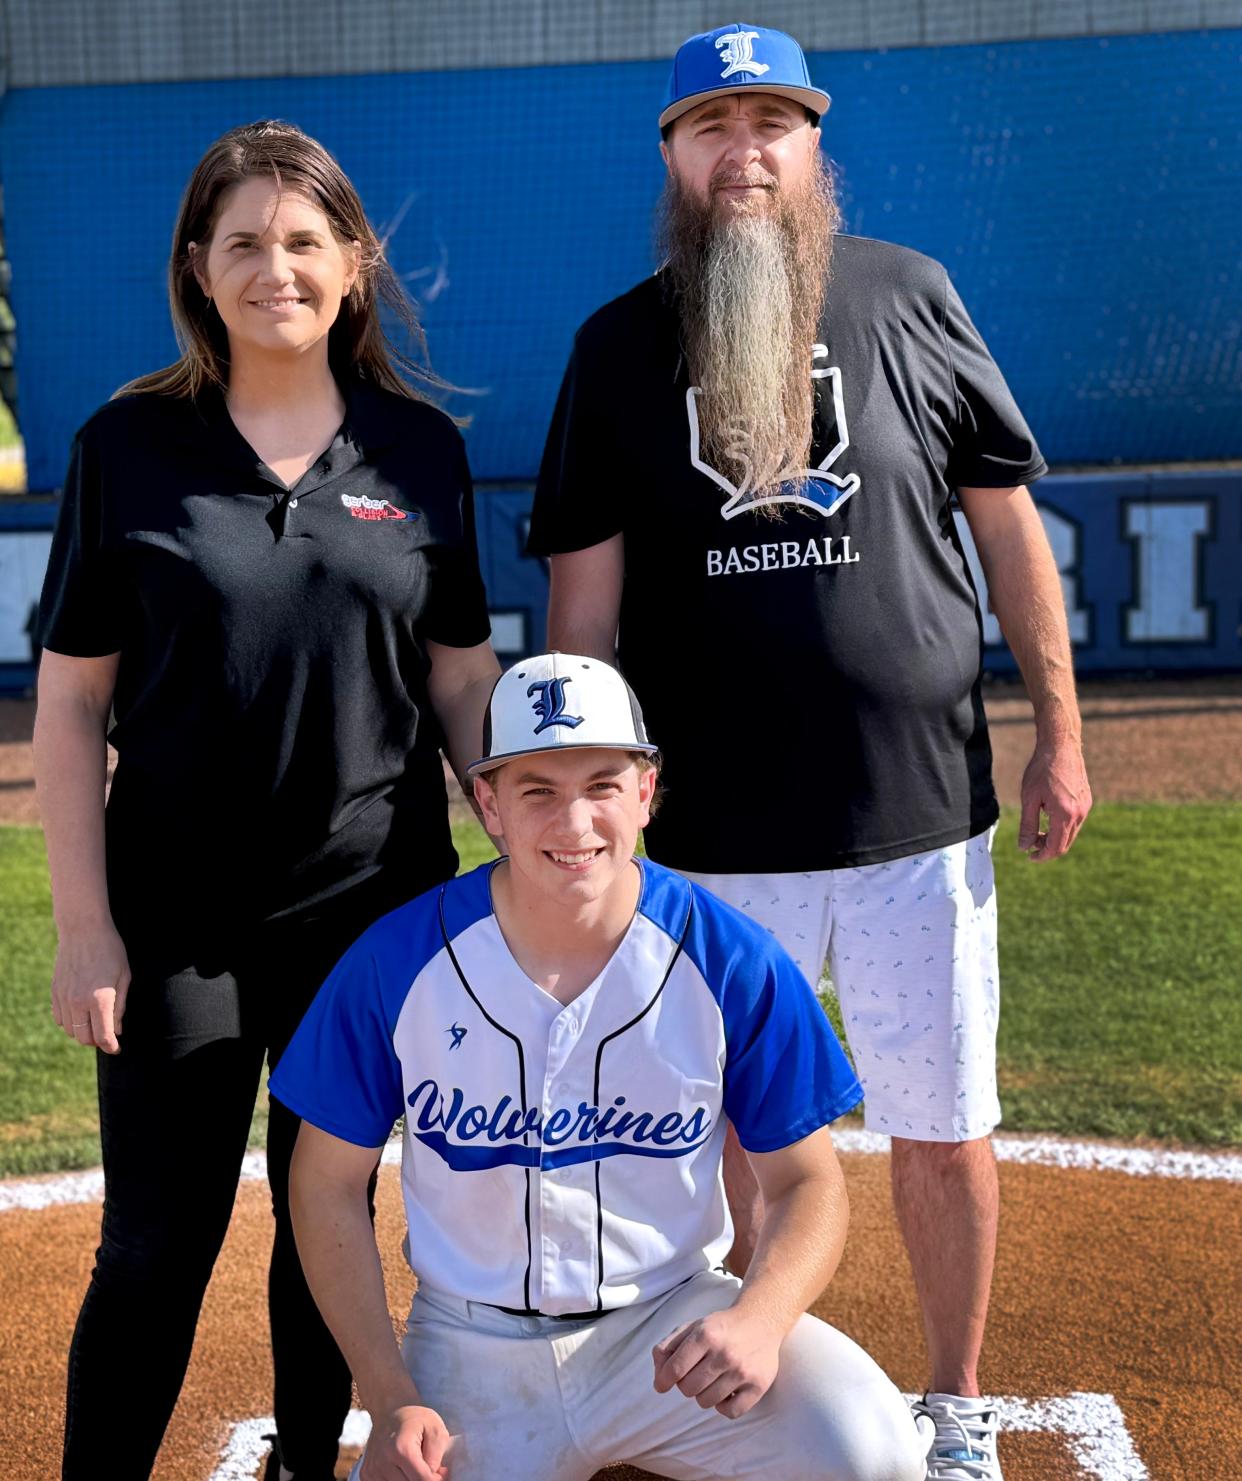 La Vergne senior baseball player Ashton Keck (front) is shown with his adoptive parents, Elizabeth and T.J. Townsend.